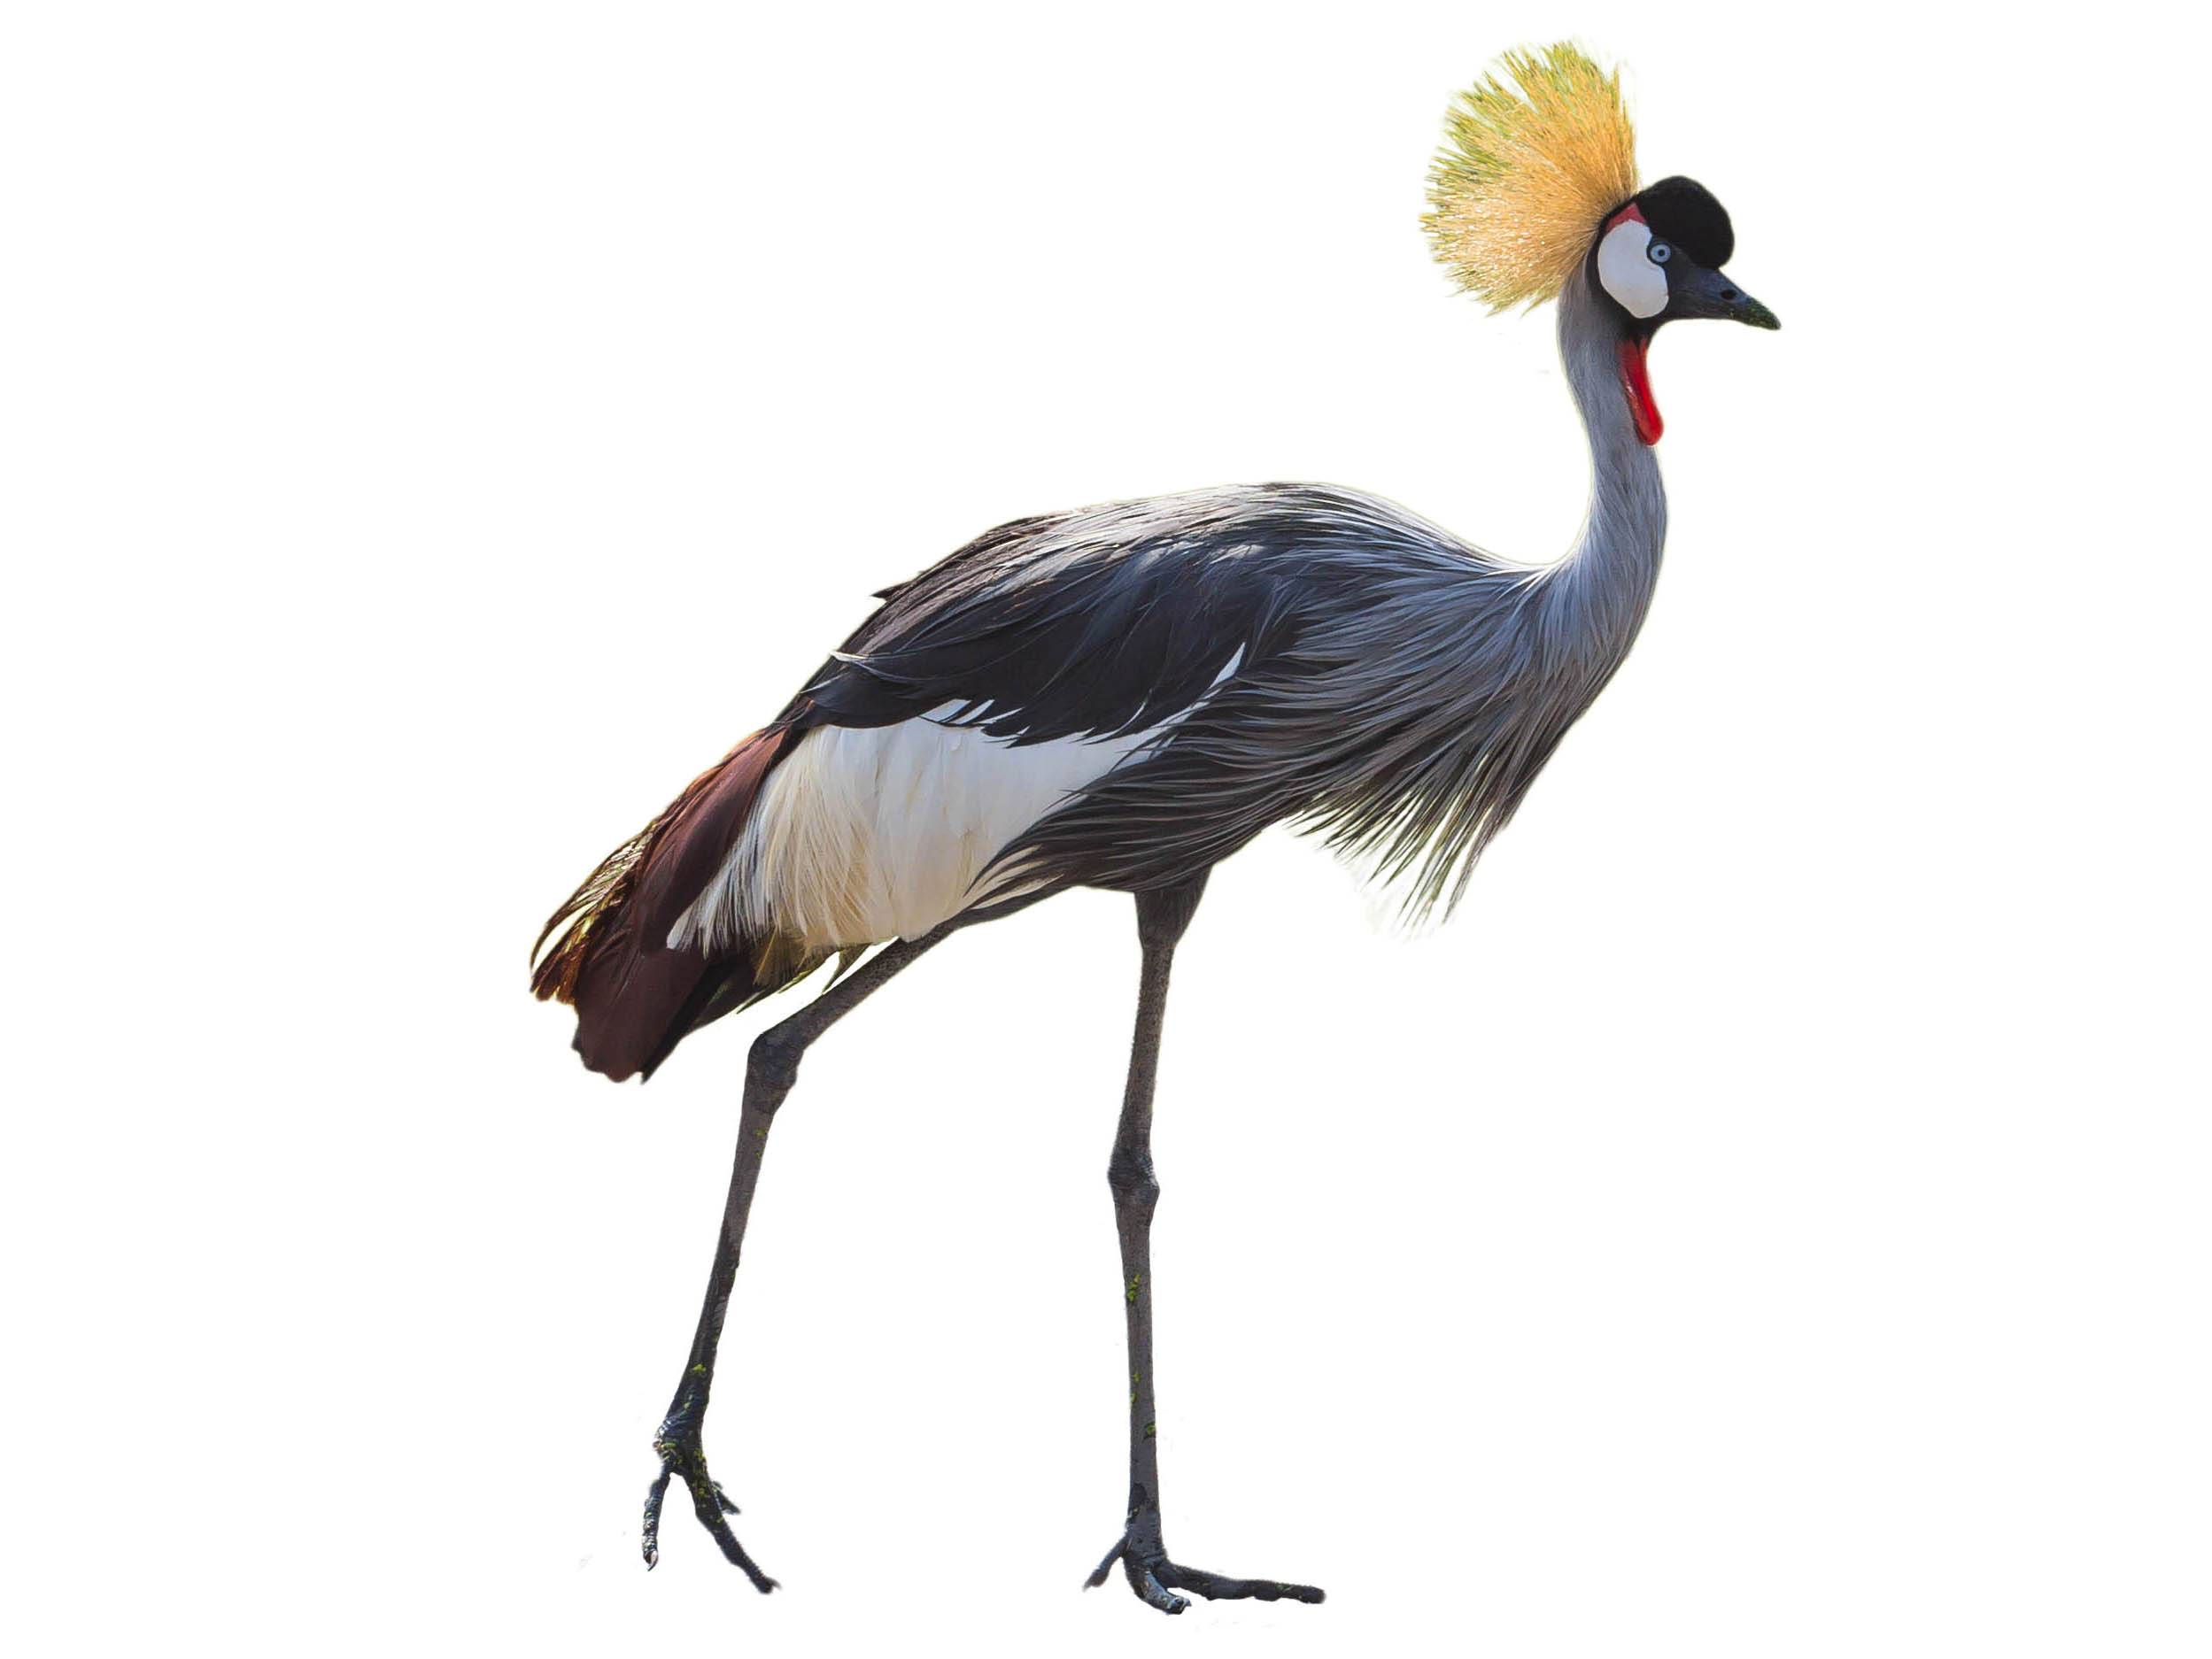 A photo of a Black Crowned Crane (Balearica pavonina)